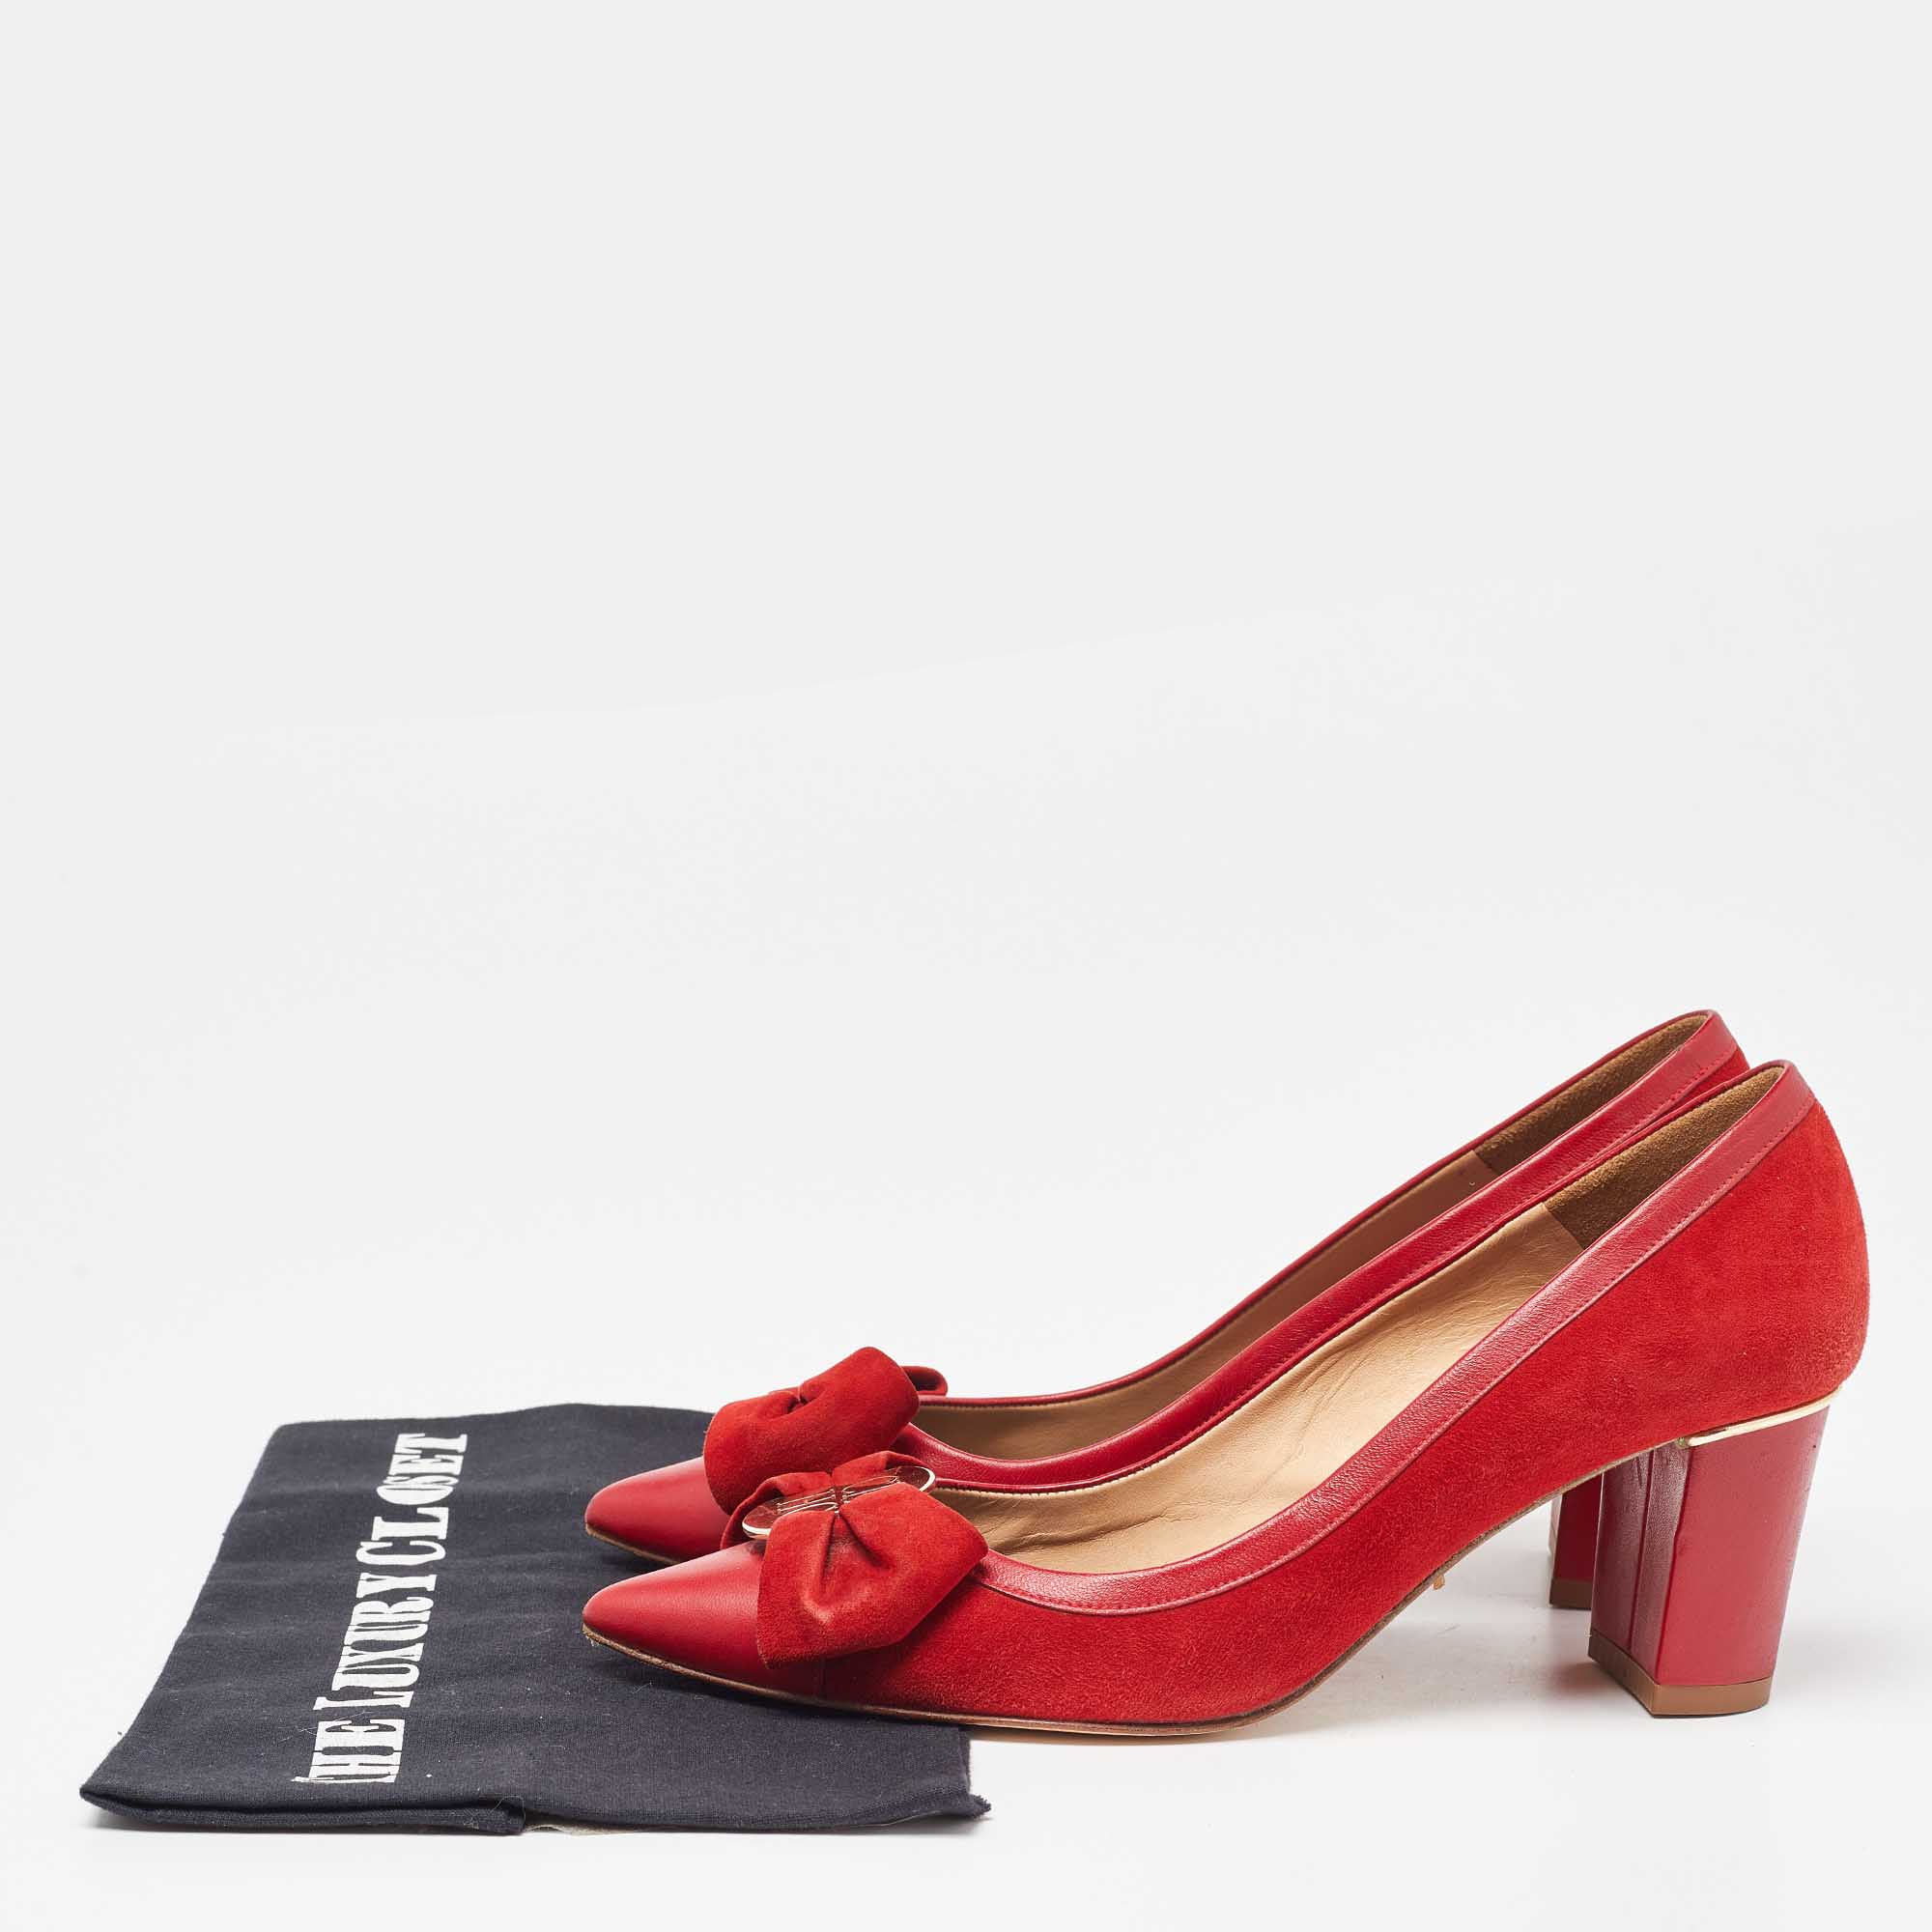 CH Carolina Herrera Red Leather And Suede Bow Pumps Size 37